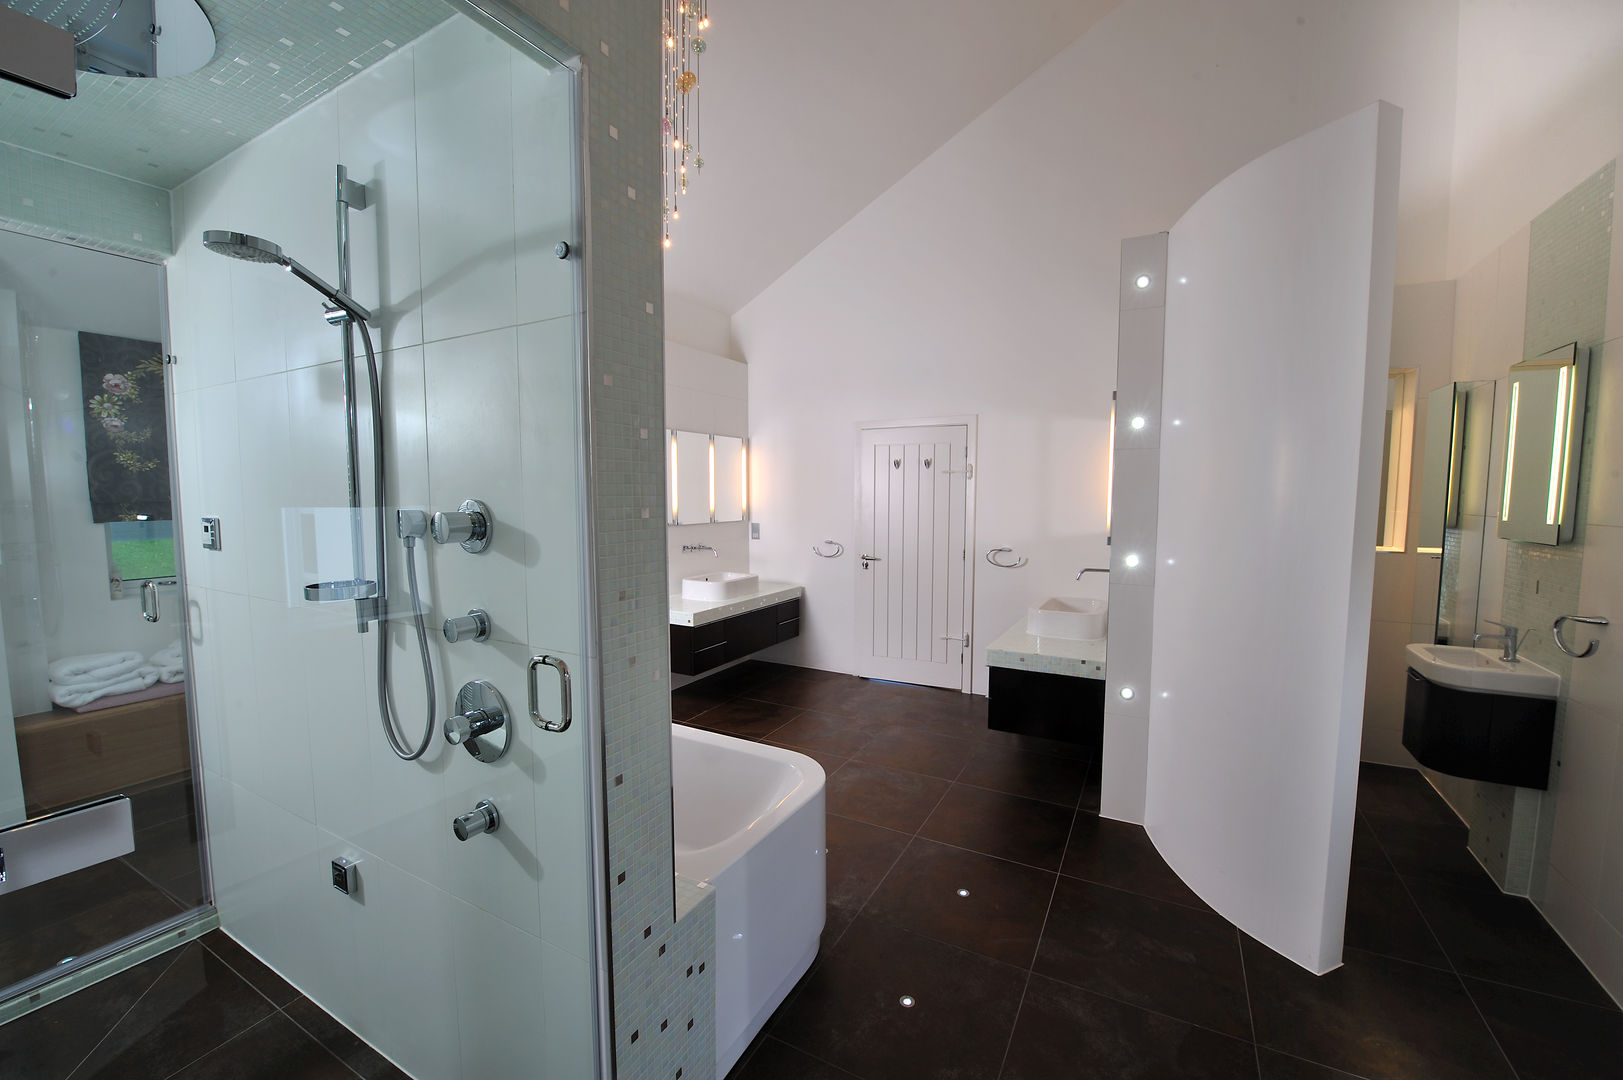 Sea House, Porth | Cornwall, Perfect Stays Perfect Stays Ausgefallene Badezimmer Bathroom,ensuite,wall hung basin,walk in shower,luxury,modern,beach house,holiday home